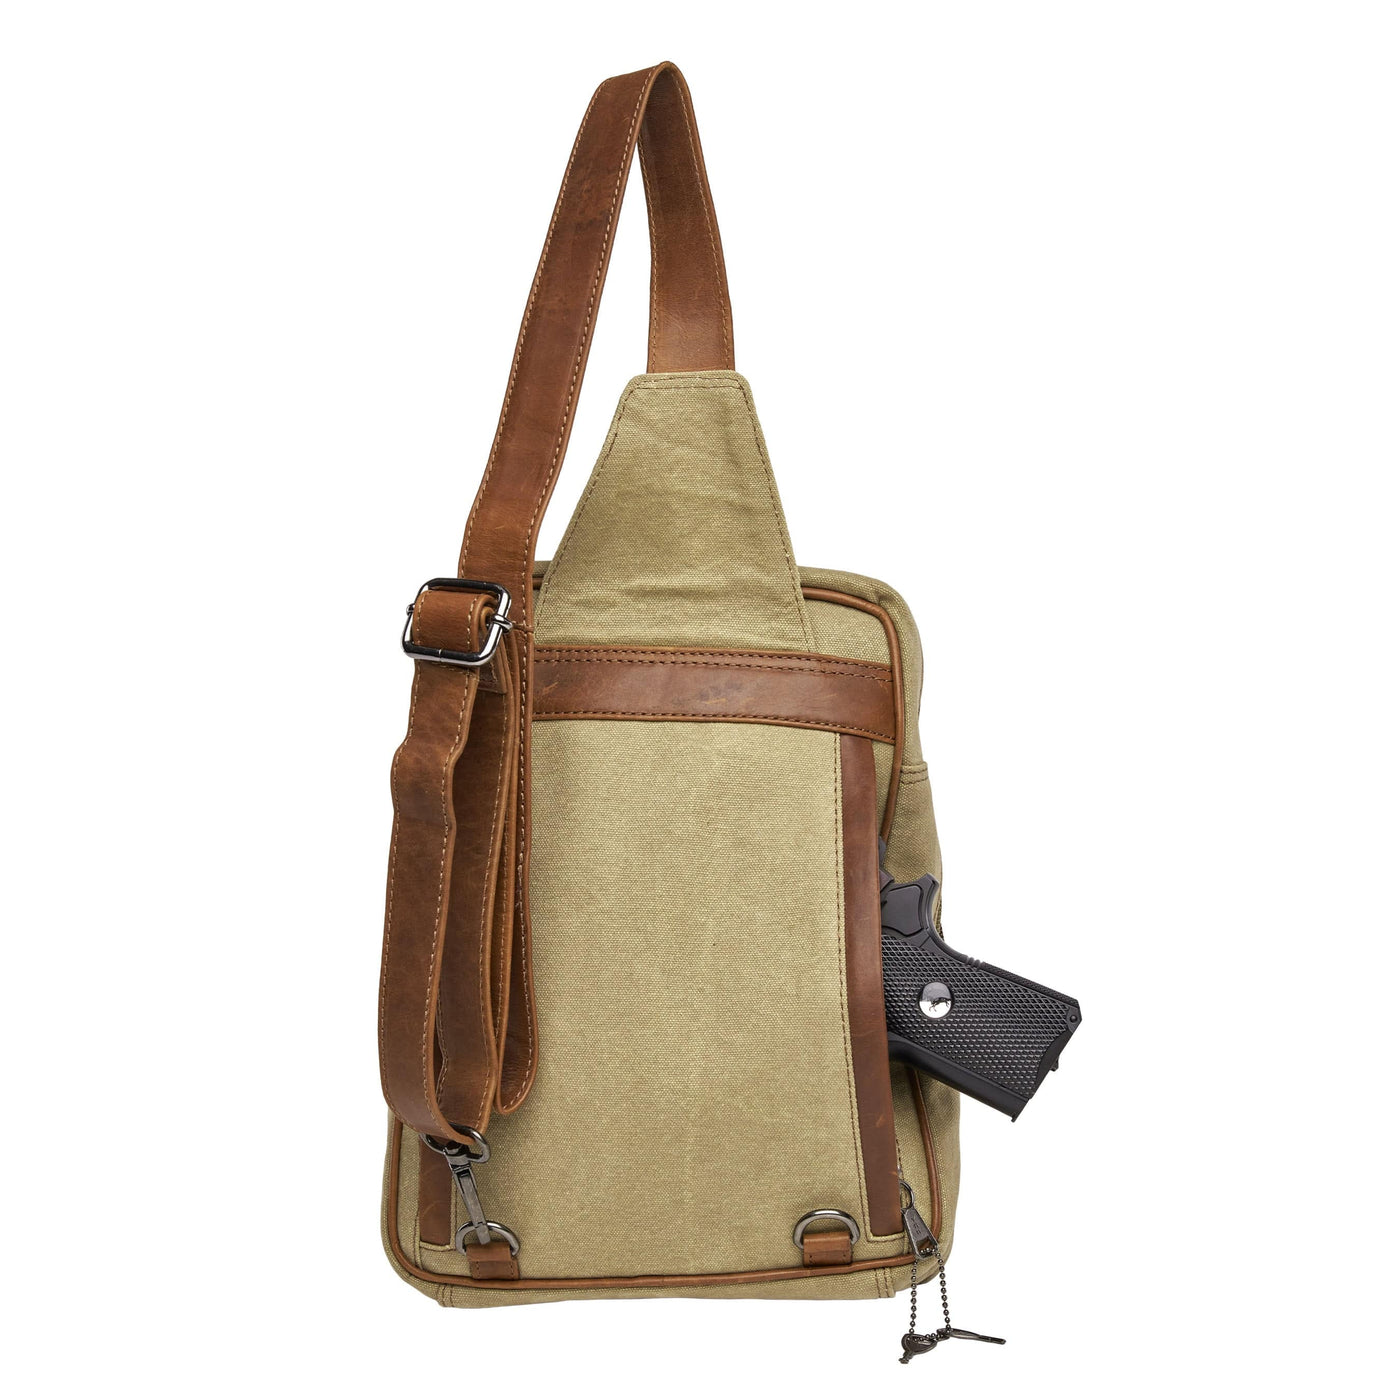 Concealed Carry Unisex Kennedy Canvas Sling Backpack -  Gun Gift for Women -  CCW Stylish Bag -  Women's Conceal Carry Purse for Firearm -  Women Gun Users -  gun carrier backpack -  best gun carrying backpack-  best gun carry backpack -  Pistol and Firearm Bag -  Western Hide Backpack -  Boho Stylish Backpack for Women -  Universal Holster Bag -  Marley Unisex Backpack - Women's Concealed Carry Bagpack -  premium leather backpack